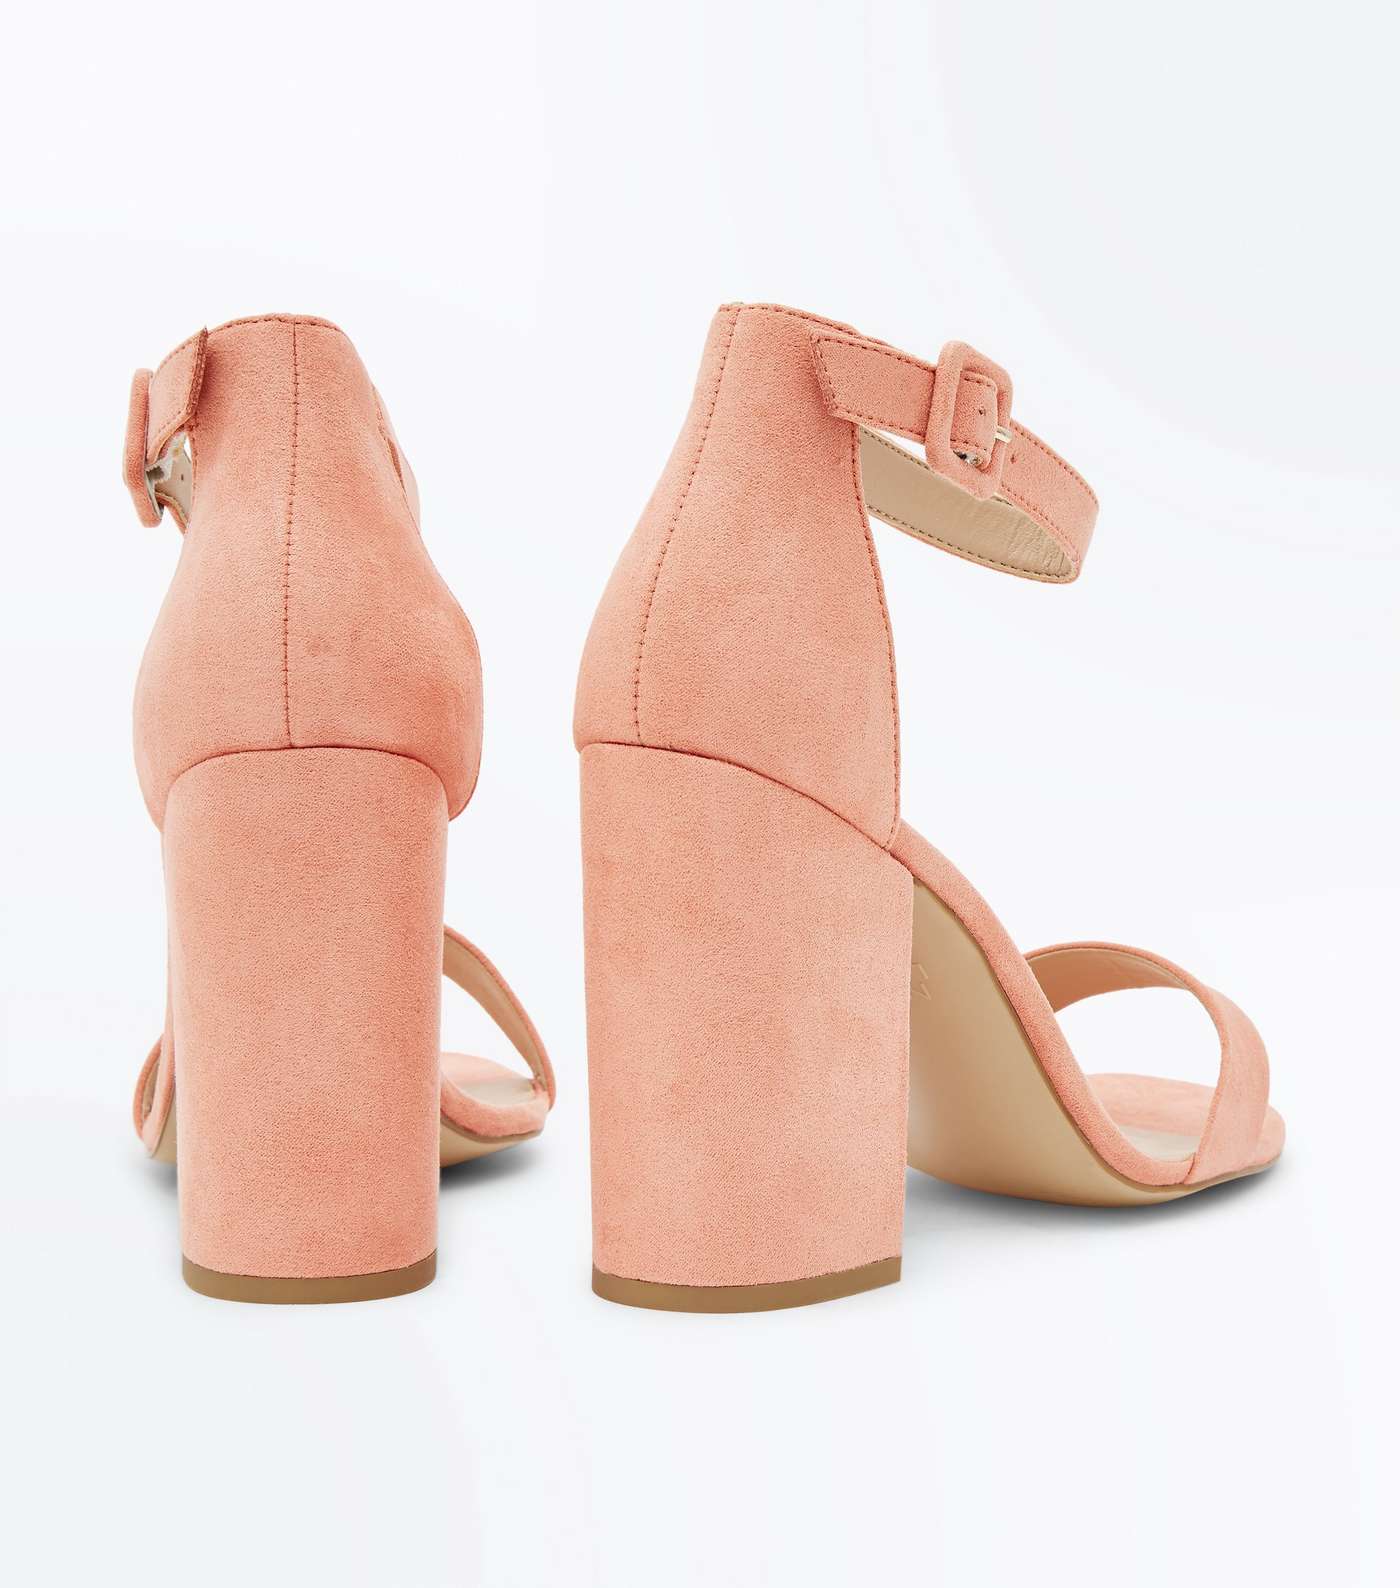 Coral Suedette Barely There Block Heels Image 3